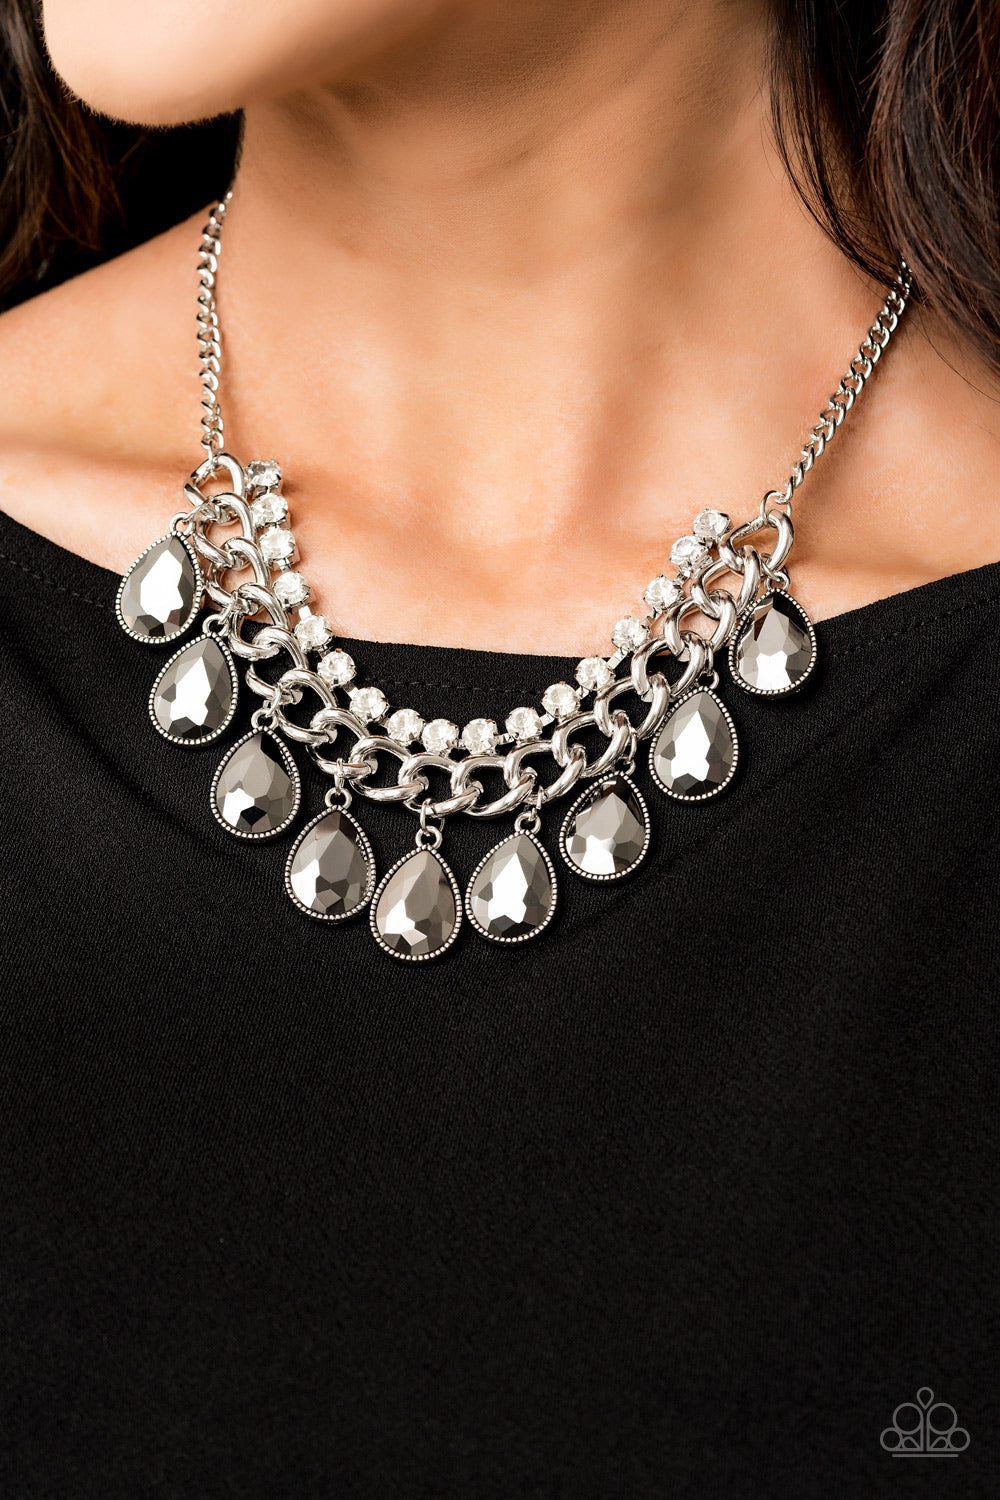 All Toget-HEIR Now Silver Hematite Rhinestone Necklace Paparazzi Accessories